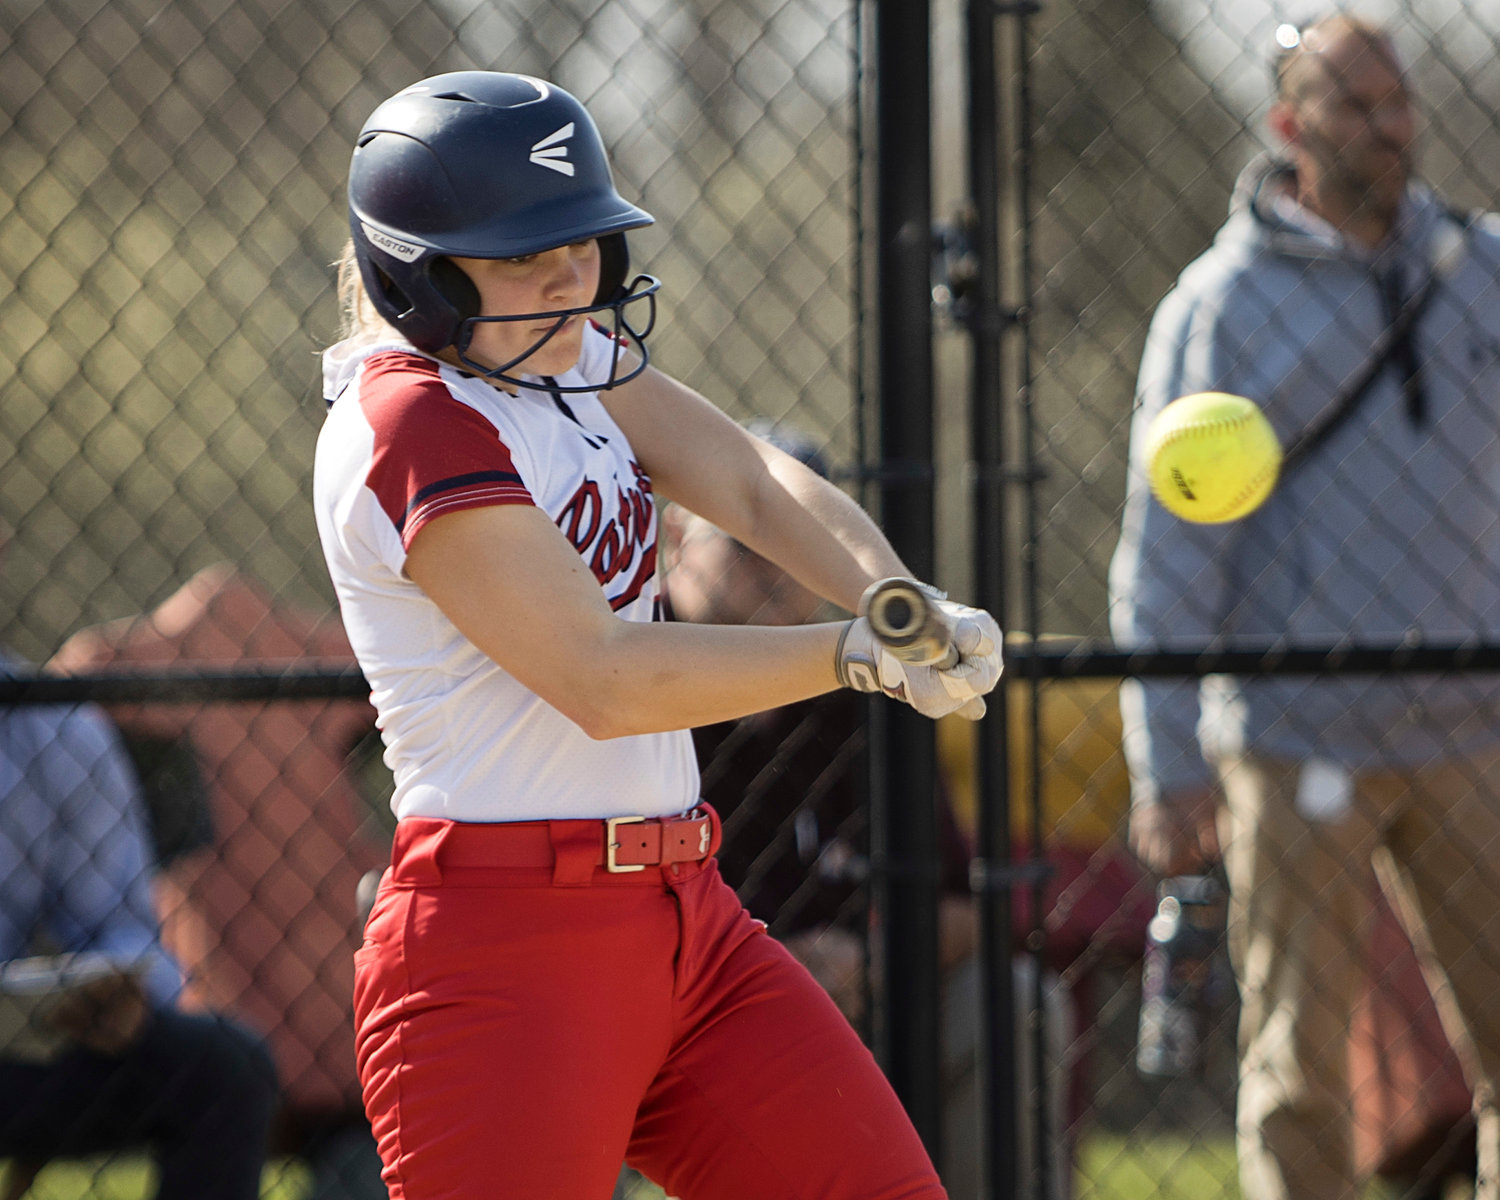 Patriots catcher Gracie Keyes makes contact during her at-bat. The junior hit a double in the sixth inning and had one RBI.